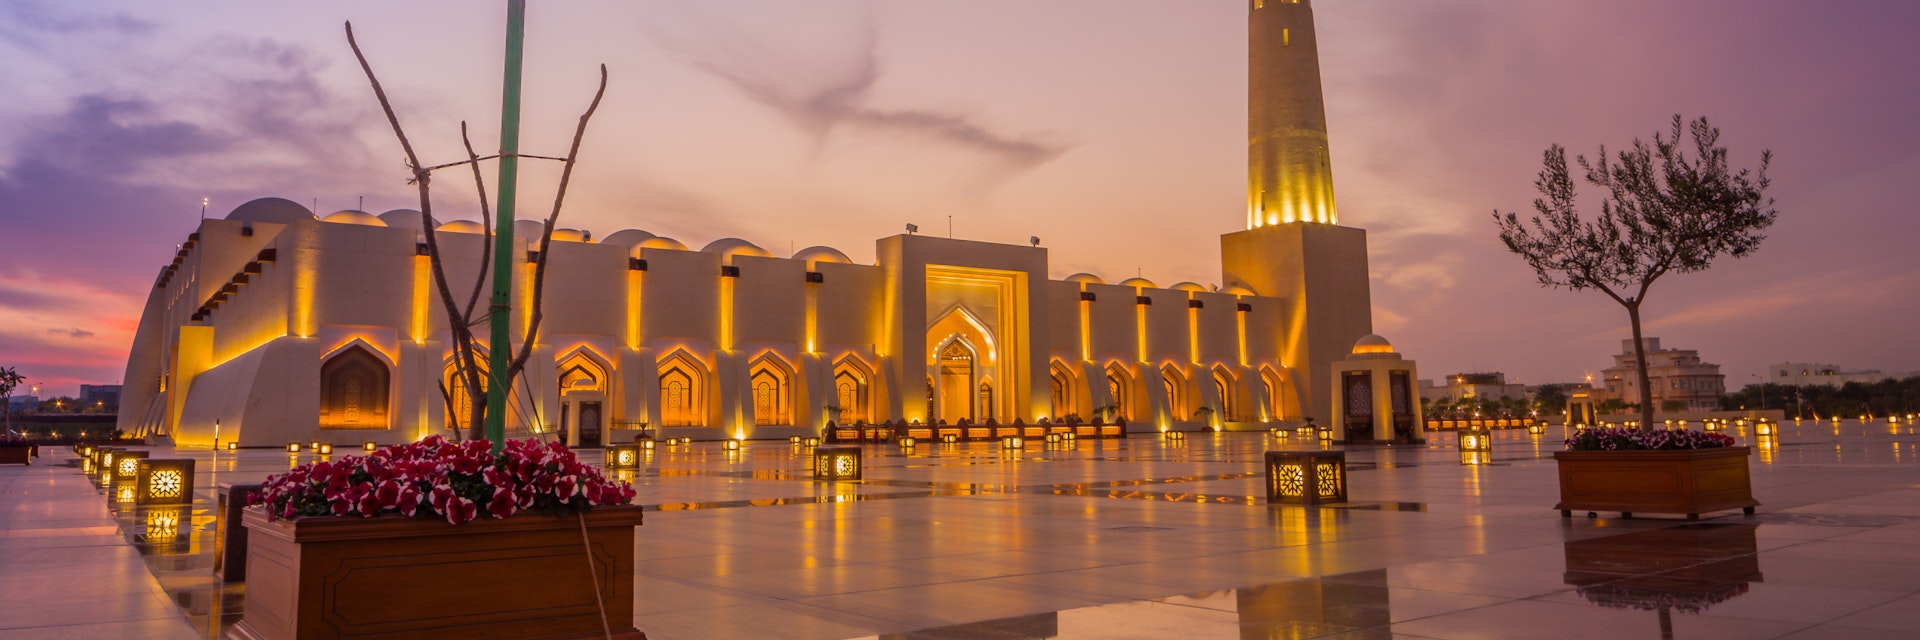 Imam Muhammad ibn Abd al-Wahhab Mosque (Qatar State Mosque) exterior view at sunset with clouds in the sky; Shutterstock ID 747708160; Your name (First / Last): Lauren Keith; GL account no.: 65050; Netsuite department name: Online Editorial; Full Product or Project name including edition: Destination page image update